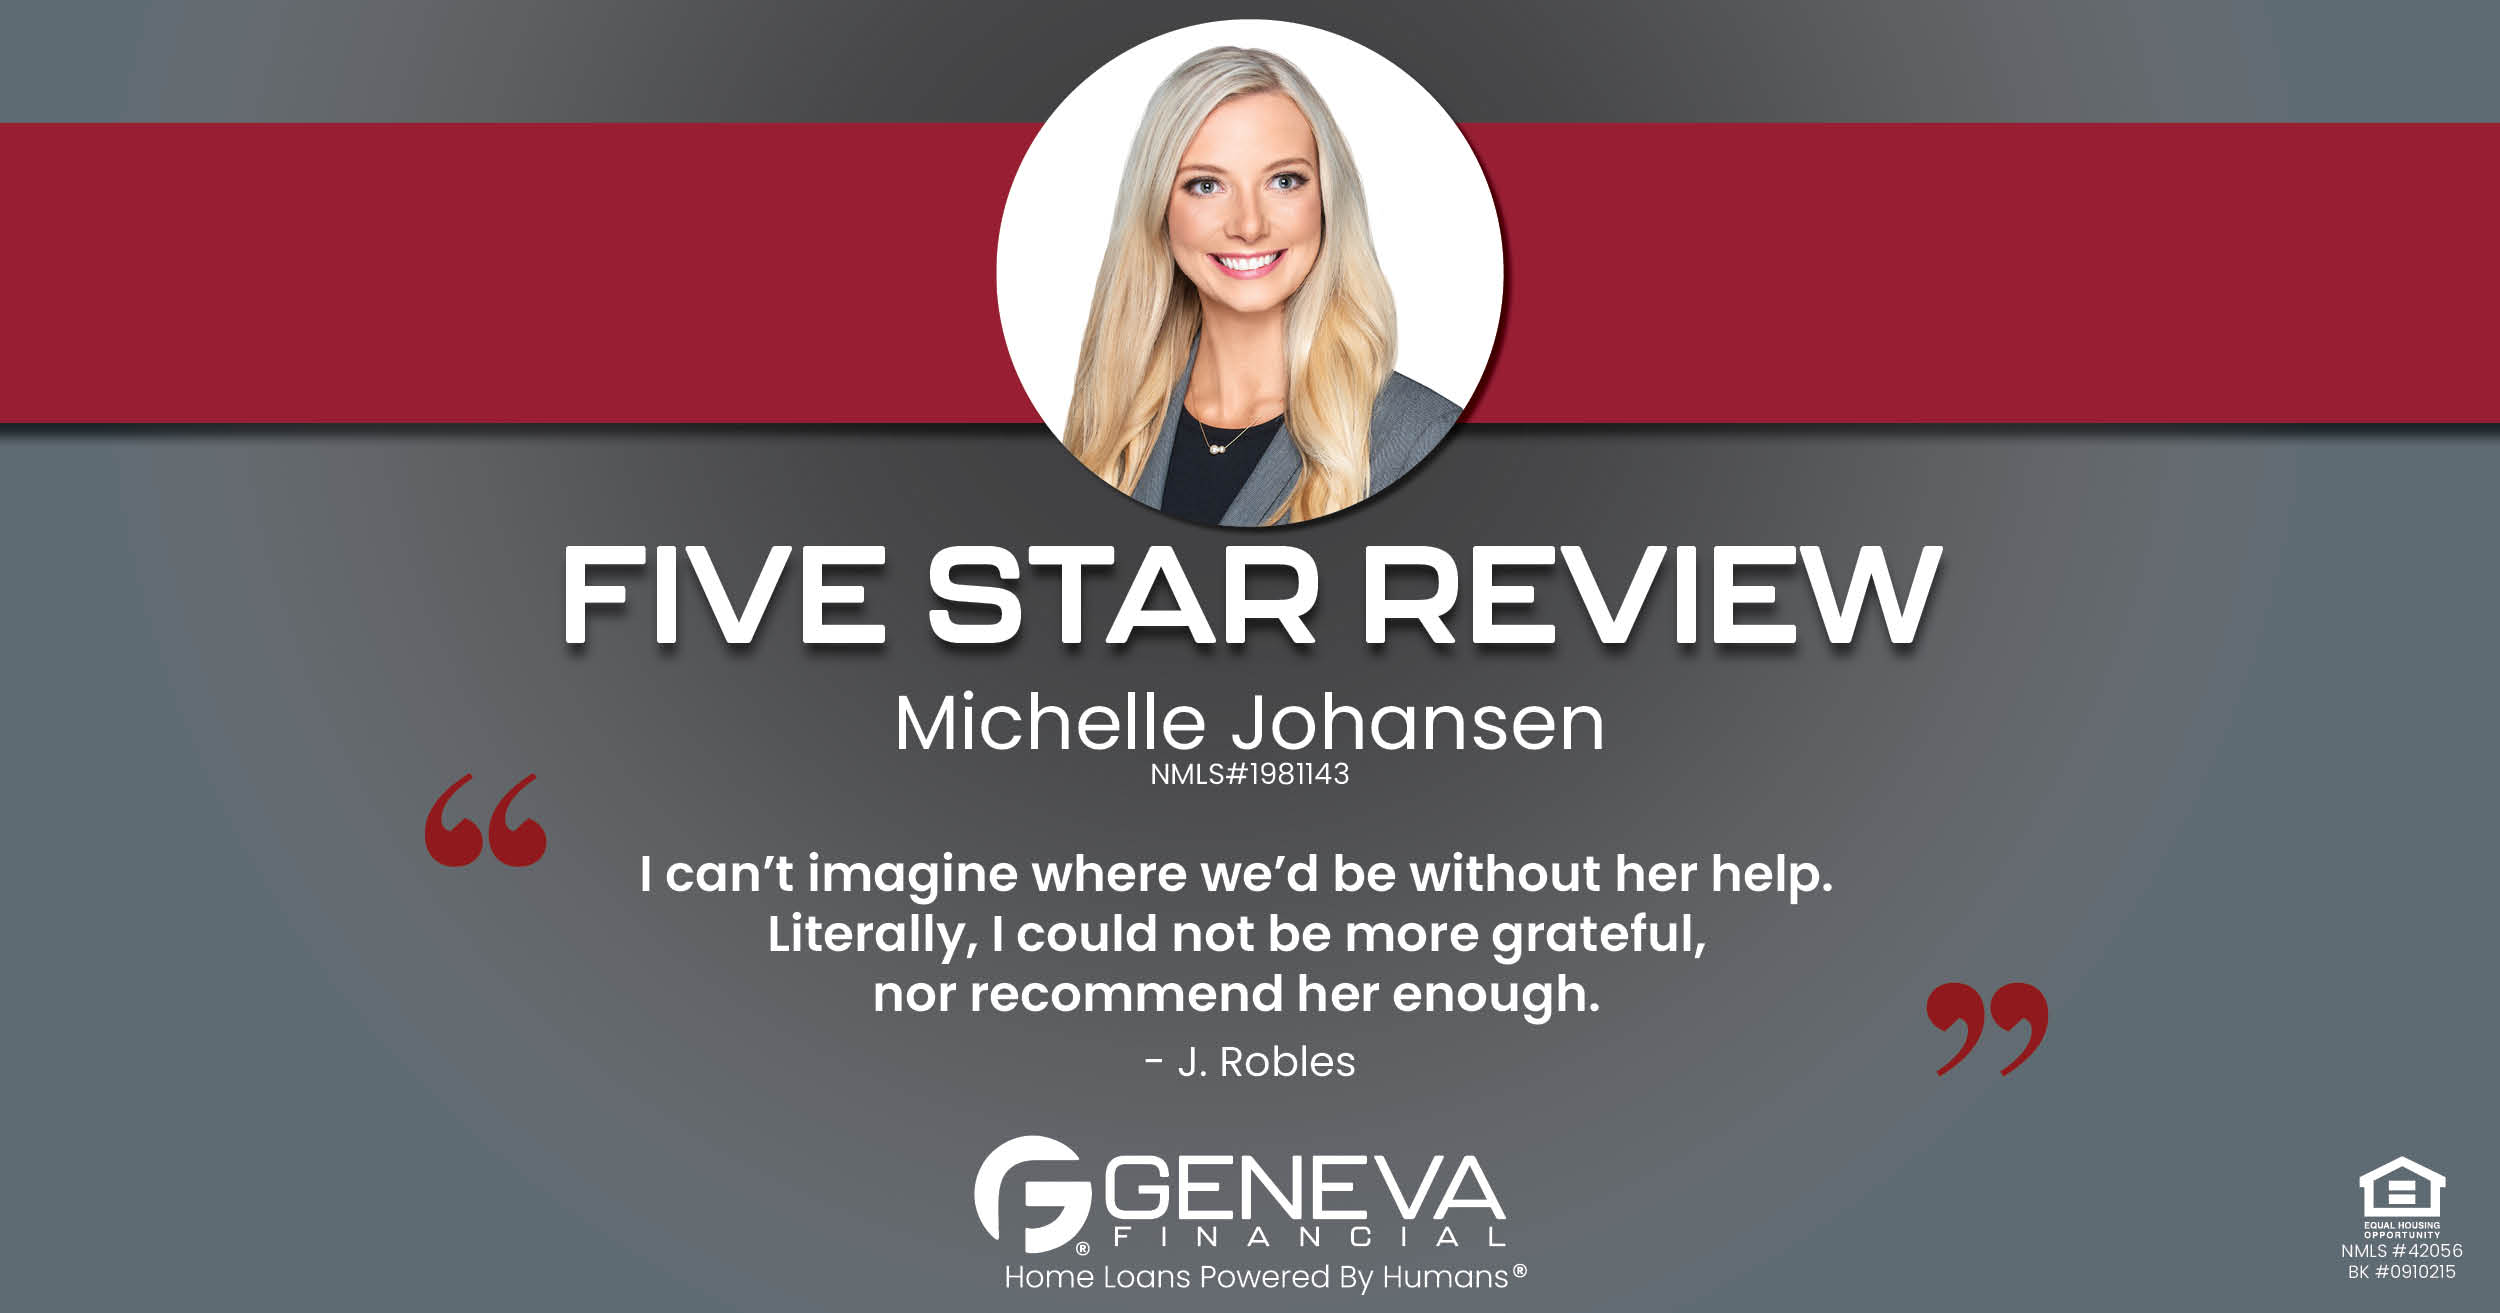 5 Star Review for Michelle Johansen, Licensed Mortgage Branch Manager with Geneva Financial, Portland, OR – Home Loans Powered by Humans®.